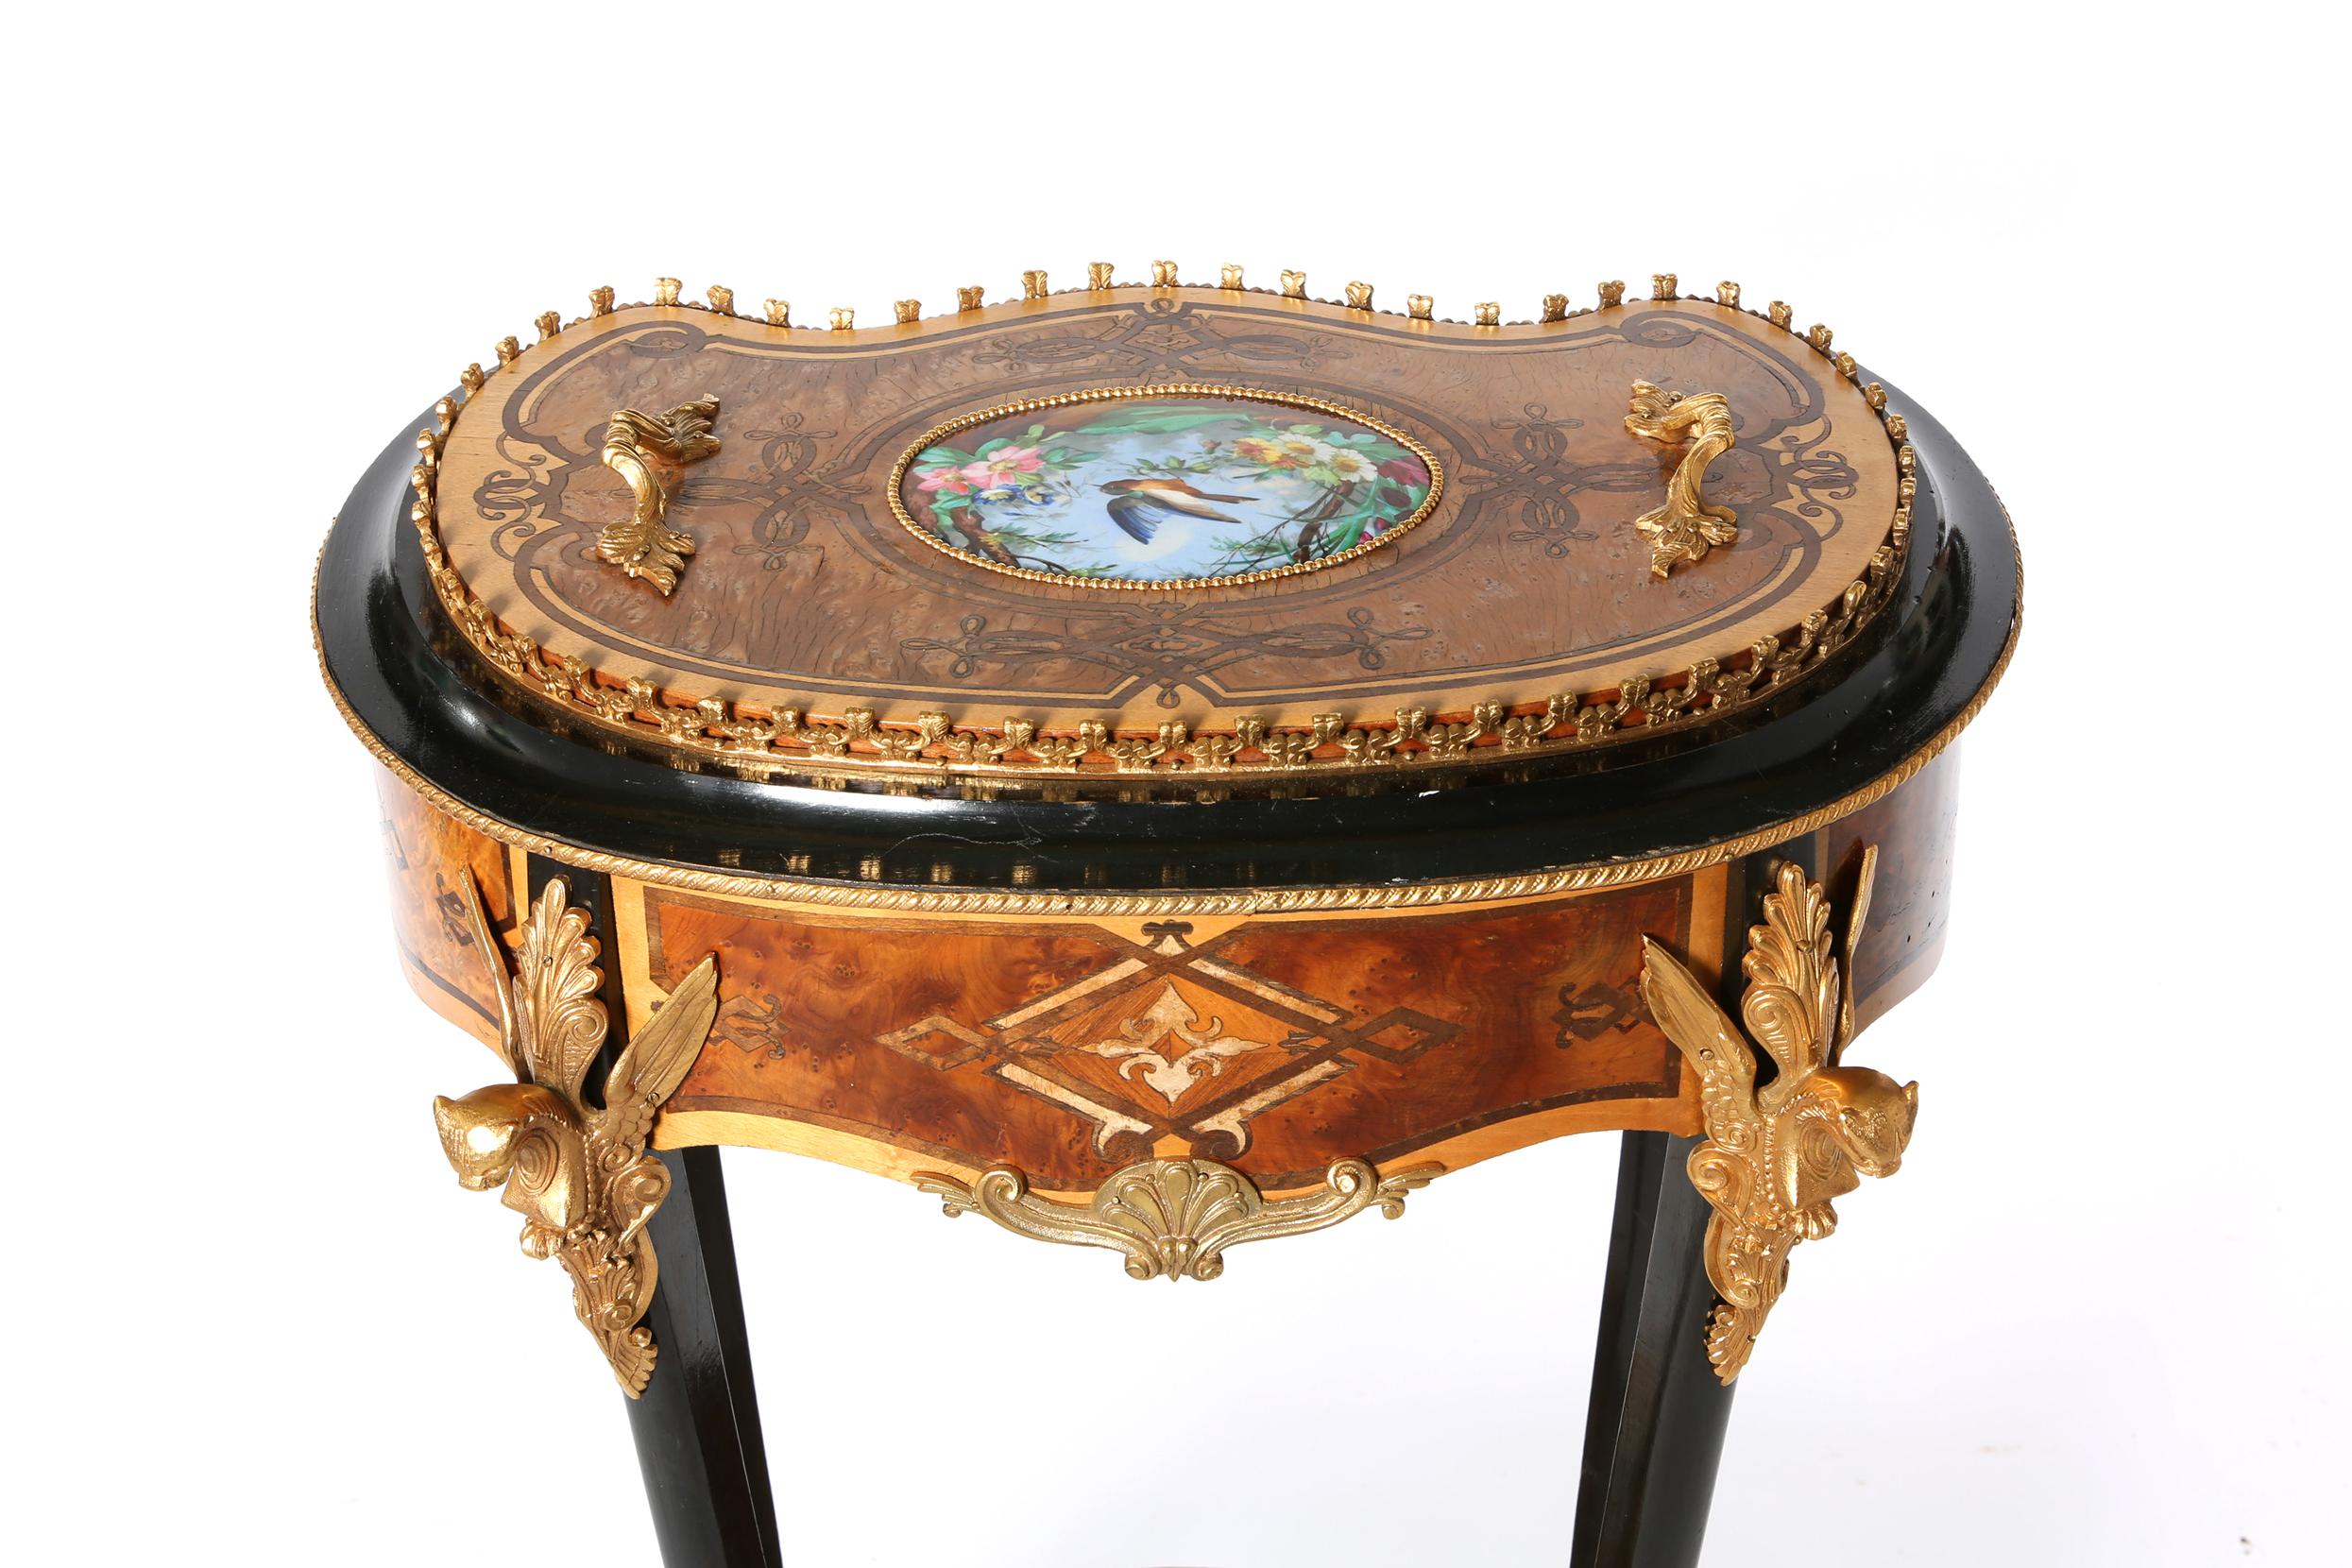 Mid-20th century English bronze mounted ebonized / inlaid wood planter / side table with sevres style porcelain decorative open top cover. The table / planter is in good condition with wear appropriate consistent to age / use. The table stand about